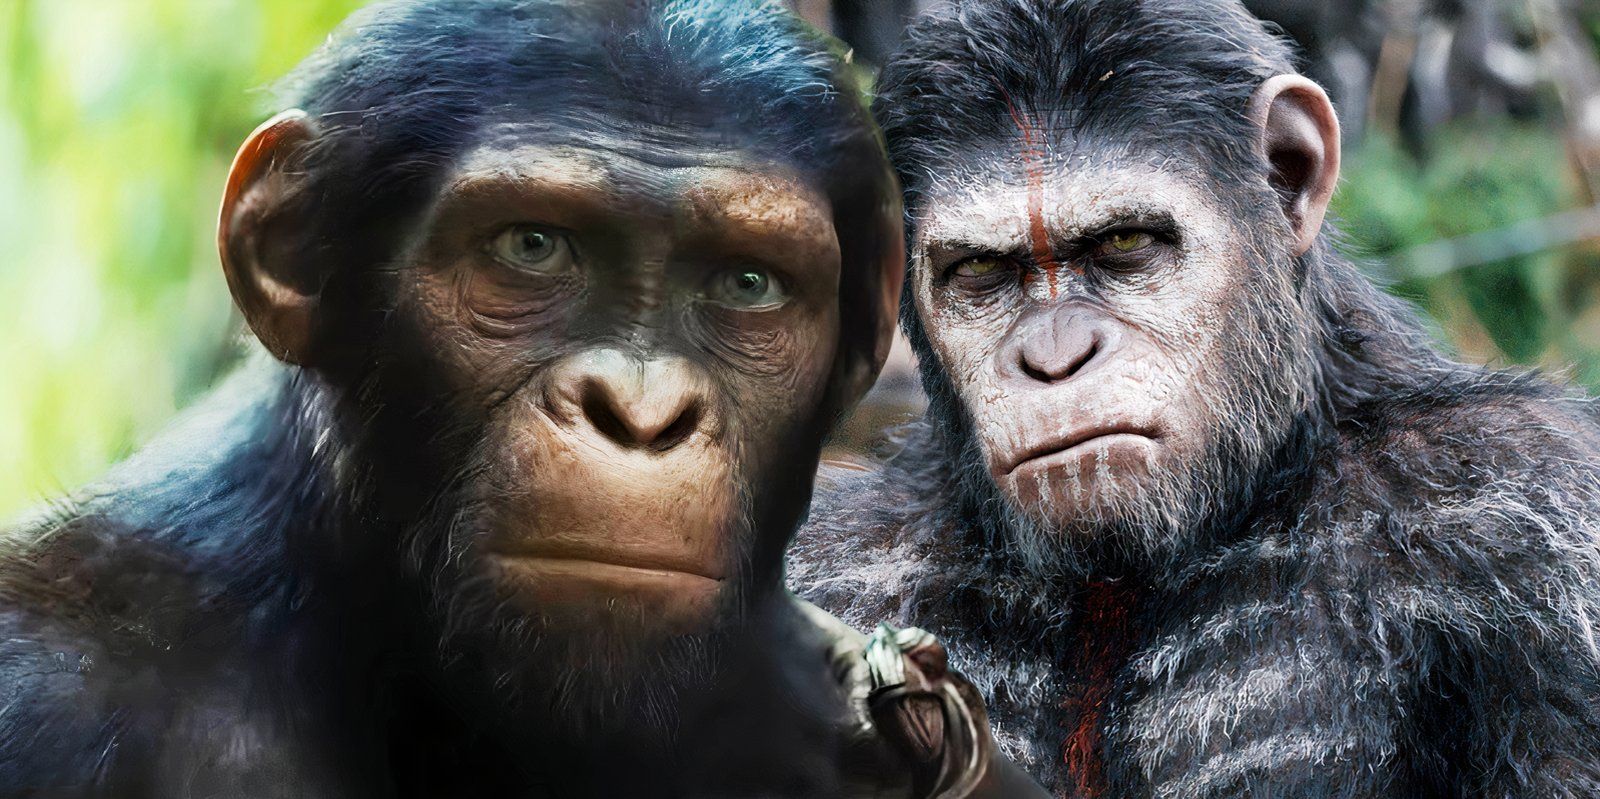 Noa in Kingdom of the Planet of the Apes juxtaposed with Caesar in Dawn of the Planet of the Apes